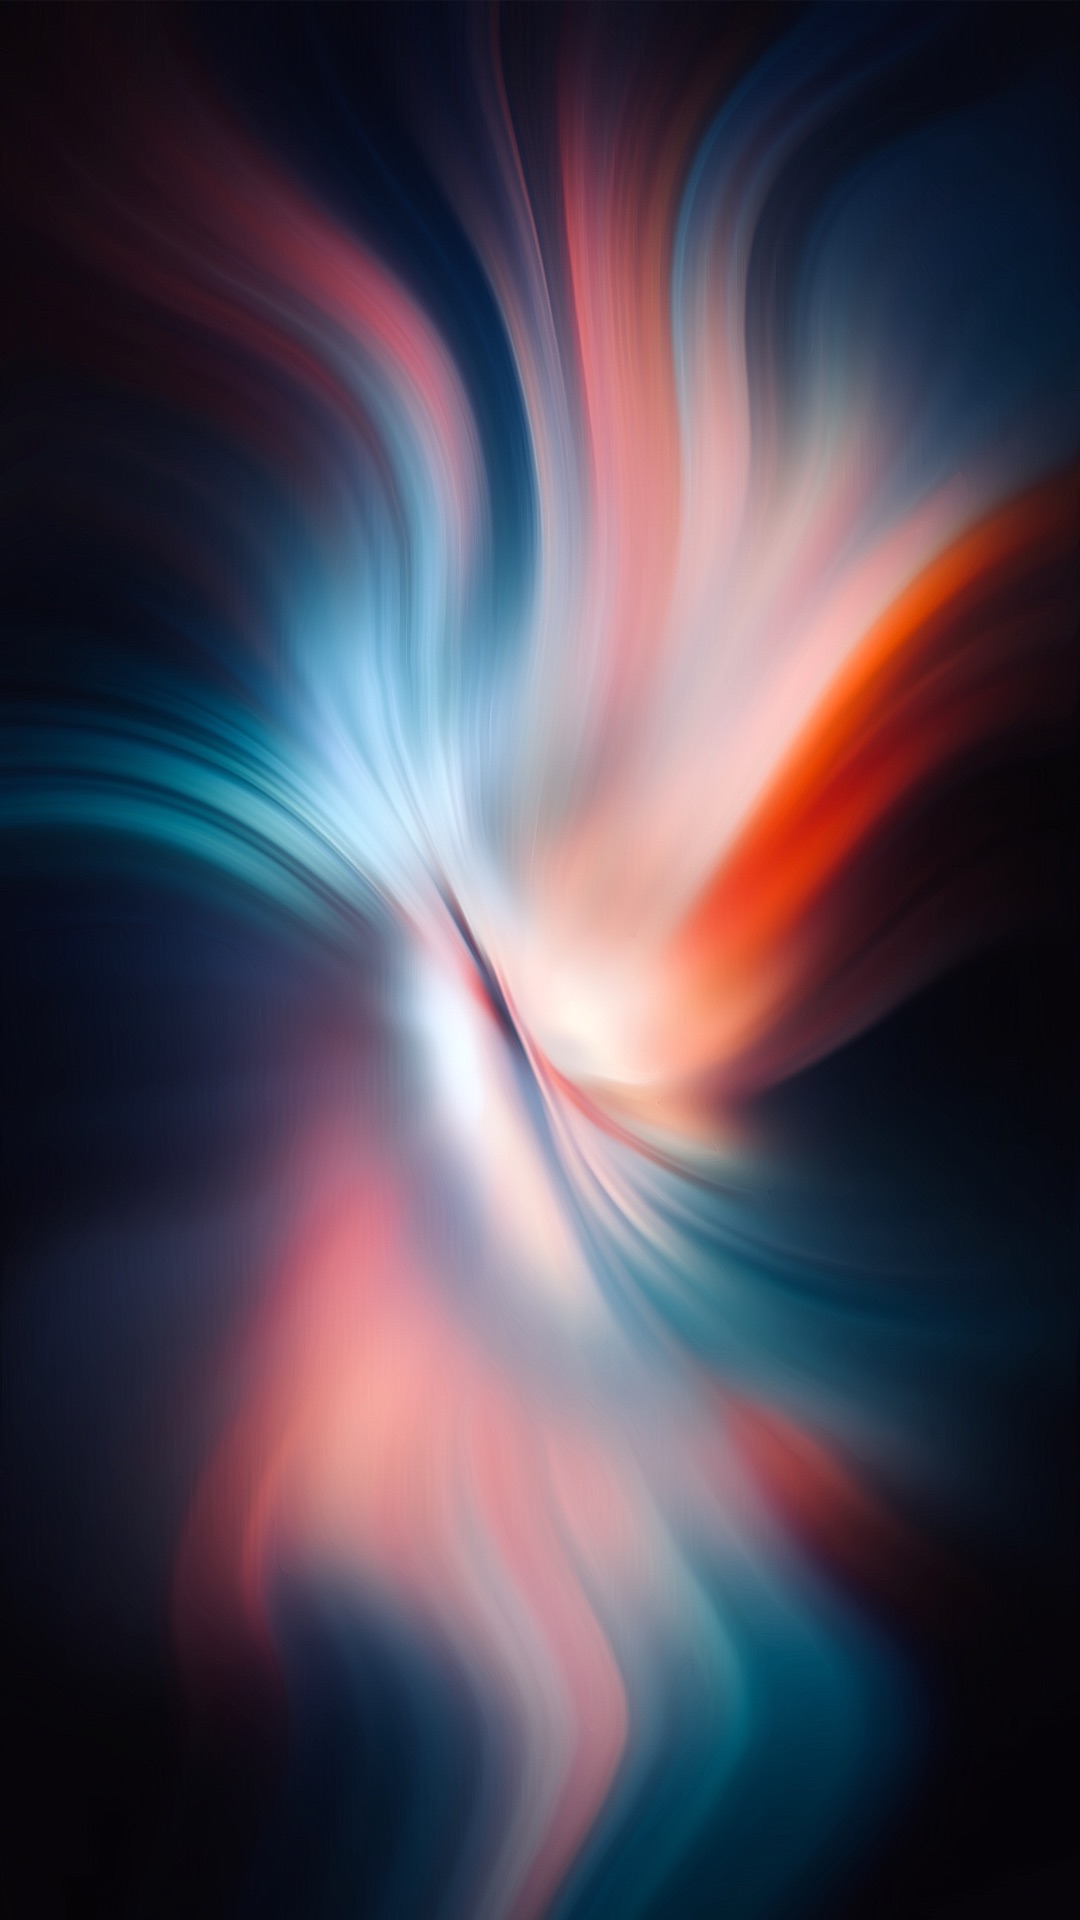 Abstract wallpapers vivid contrasting colors [pack 3]